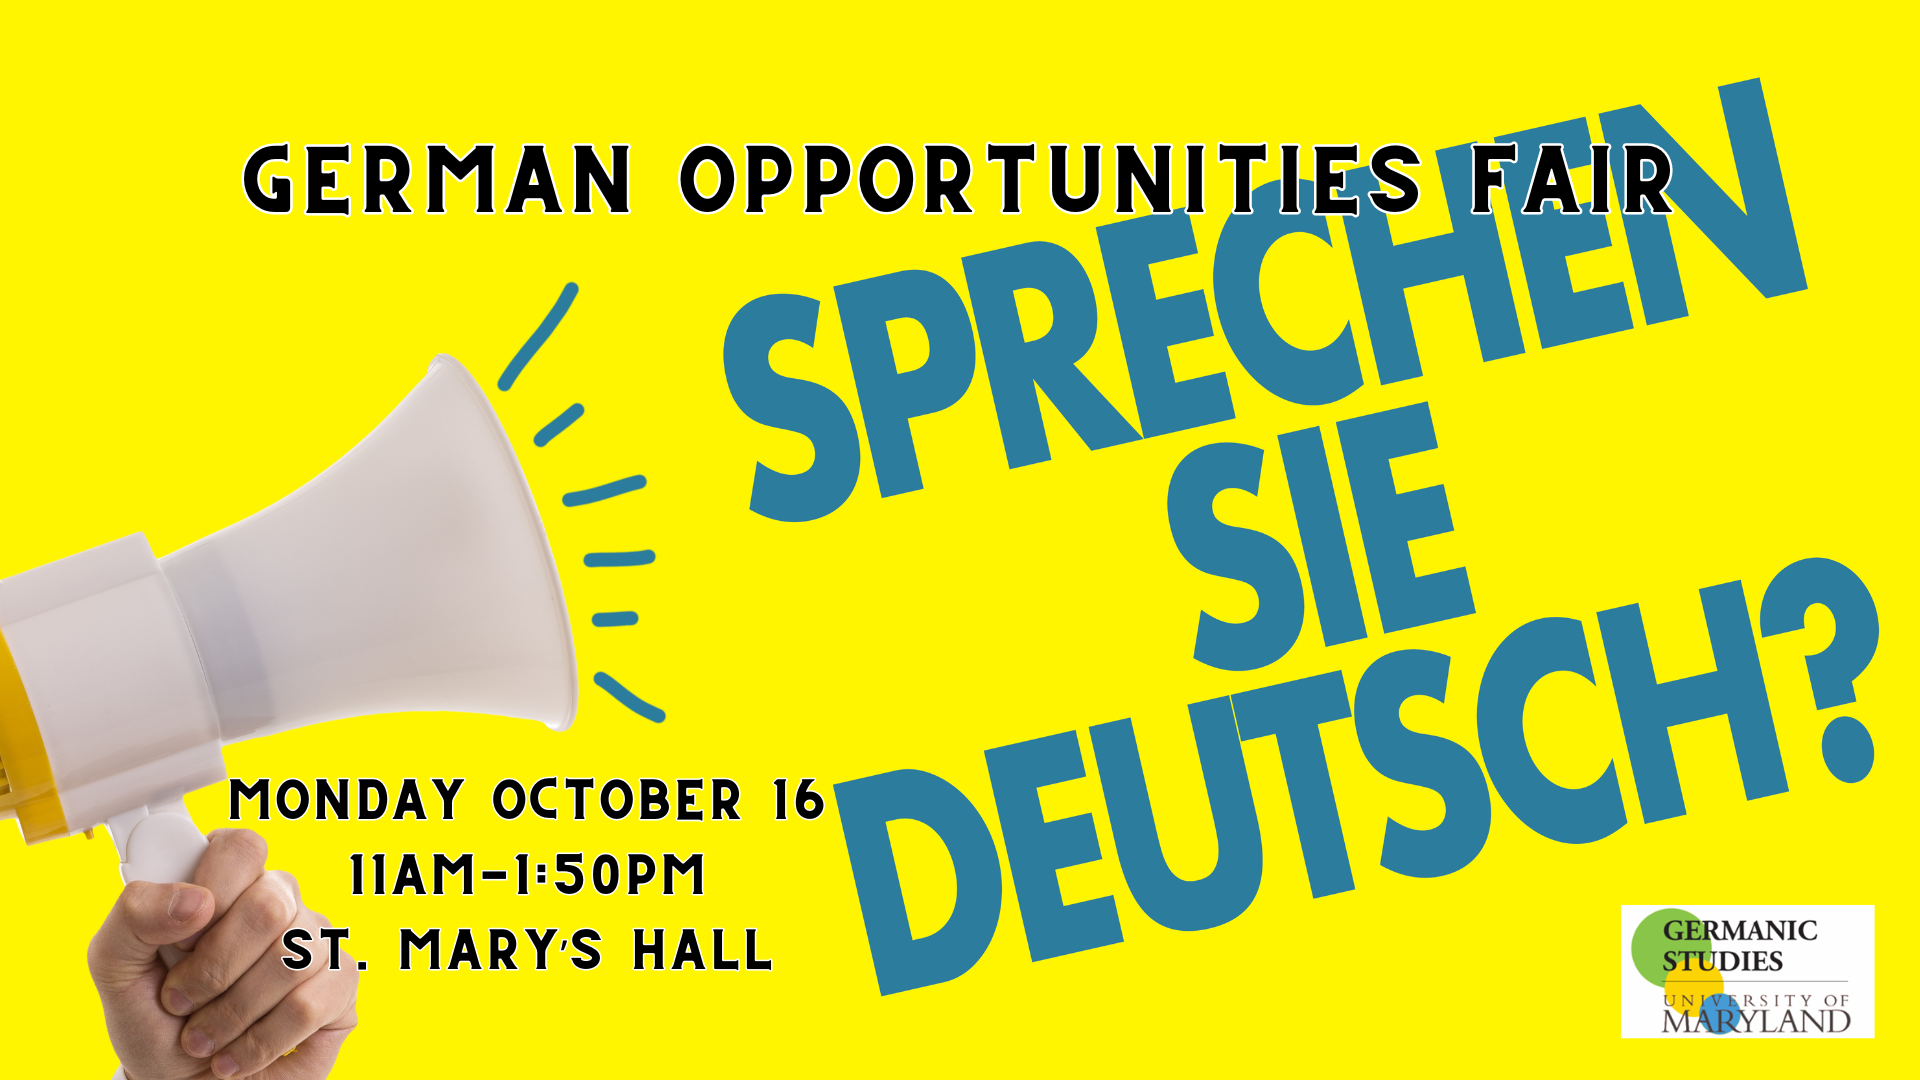 inset image for german opportunities fair f23